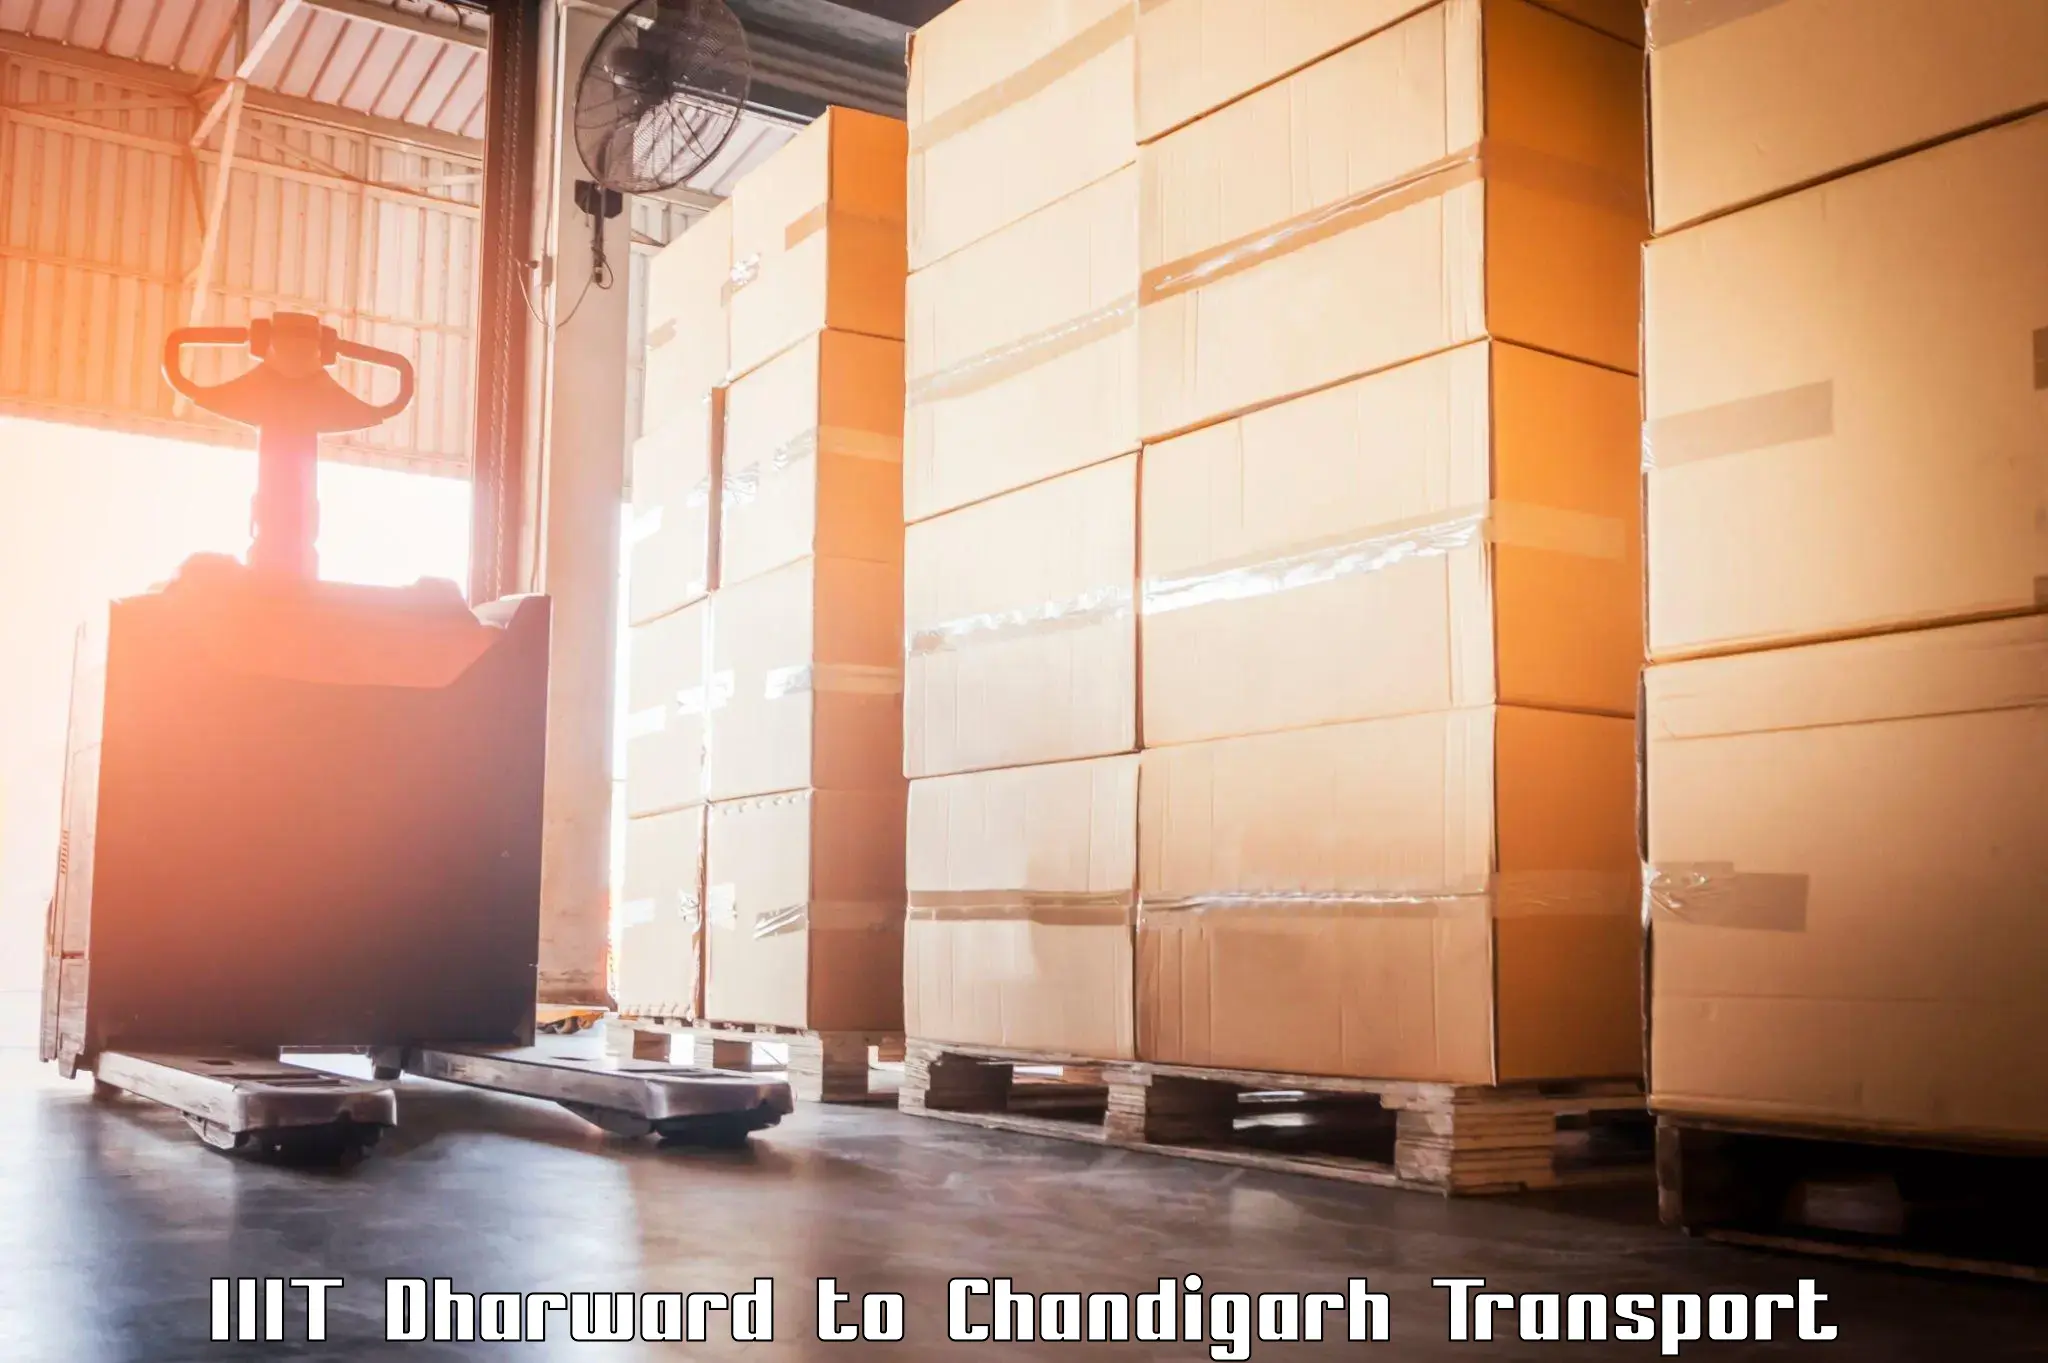 Luggage transport services IIIT Dharward to Chandigarh